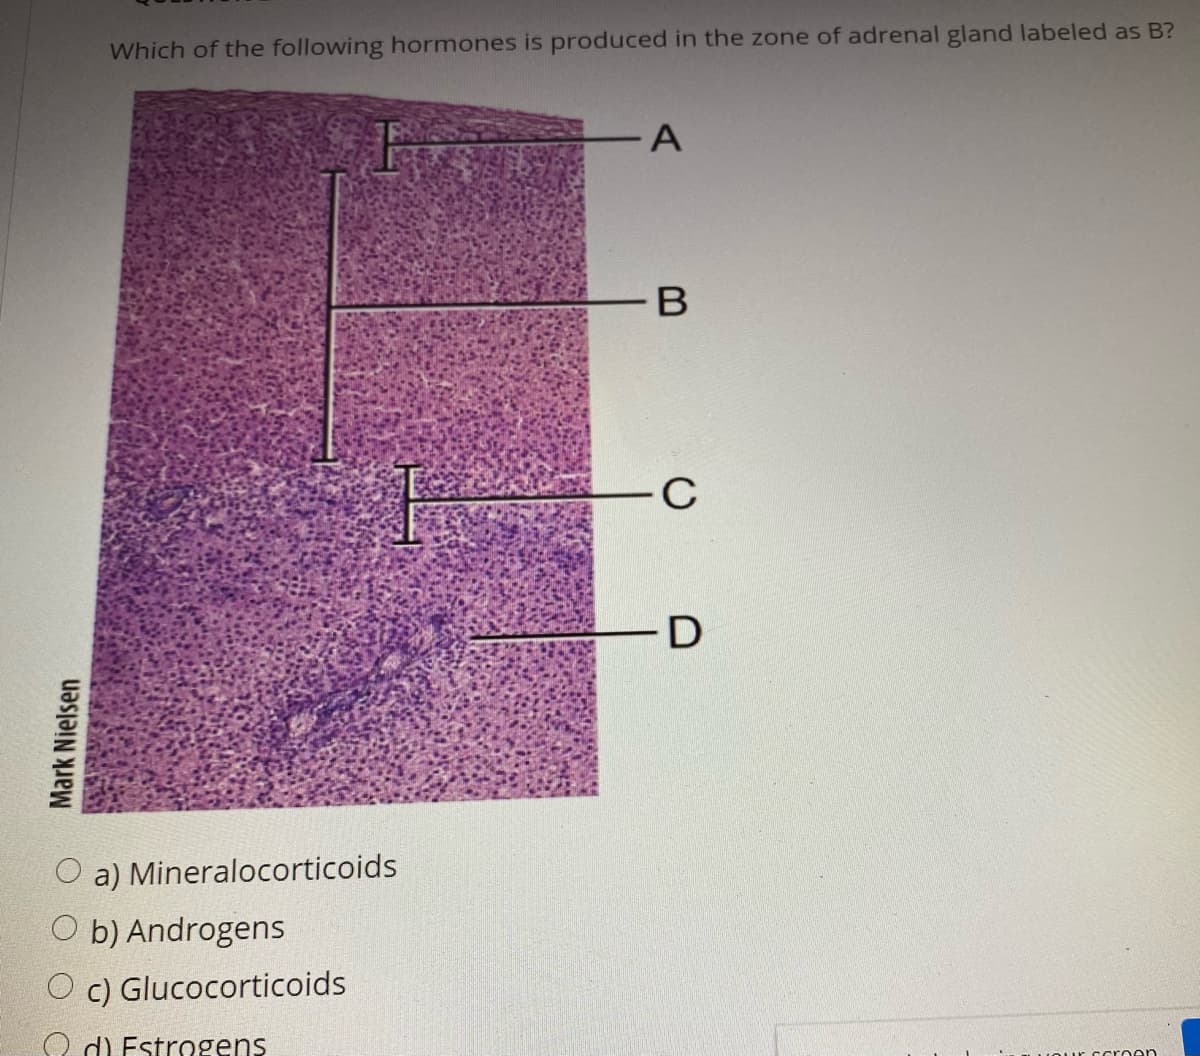 Which of the following hormones is produced in the zone of adrenal gland labeled as B?
D
O a) Mineralocorticoids
O b) Androgens
O c) Glucocorticoids
O d) Estrogens
croen
Mark Nielsen
